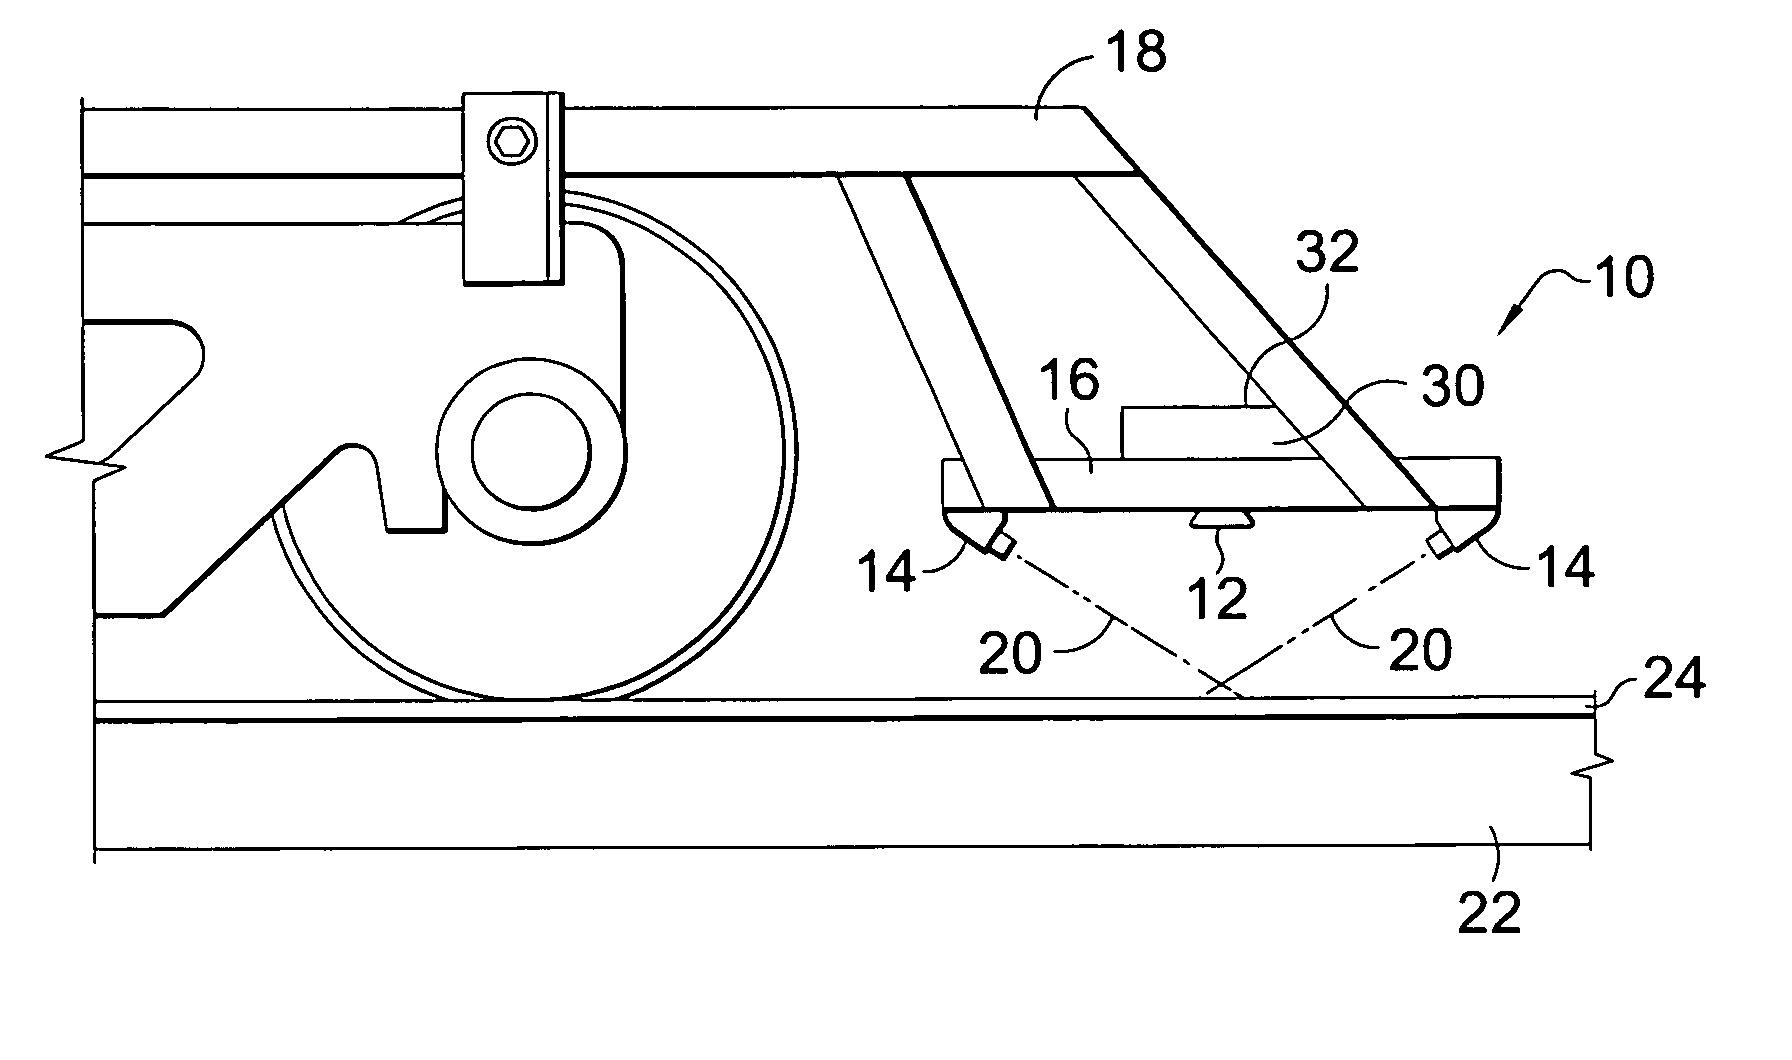 Method and apparatus for noncontact relative rail displacement, track modulus and stiffness measurement by a moving rail vehicle